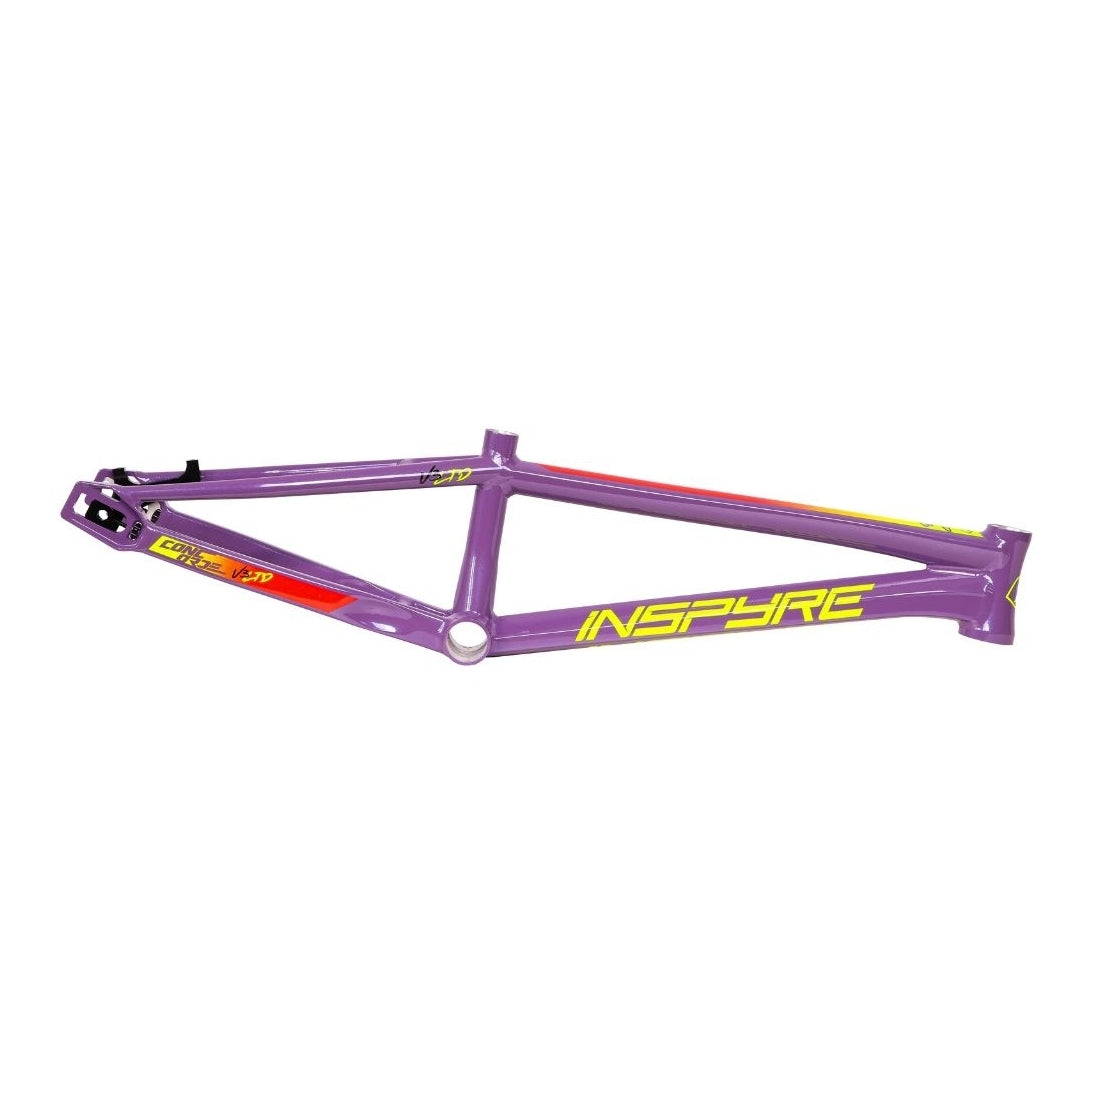 A purple and yellow Inspyre Concorde V3 Expert Frame BMX Race frame isolated on a white background.